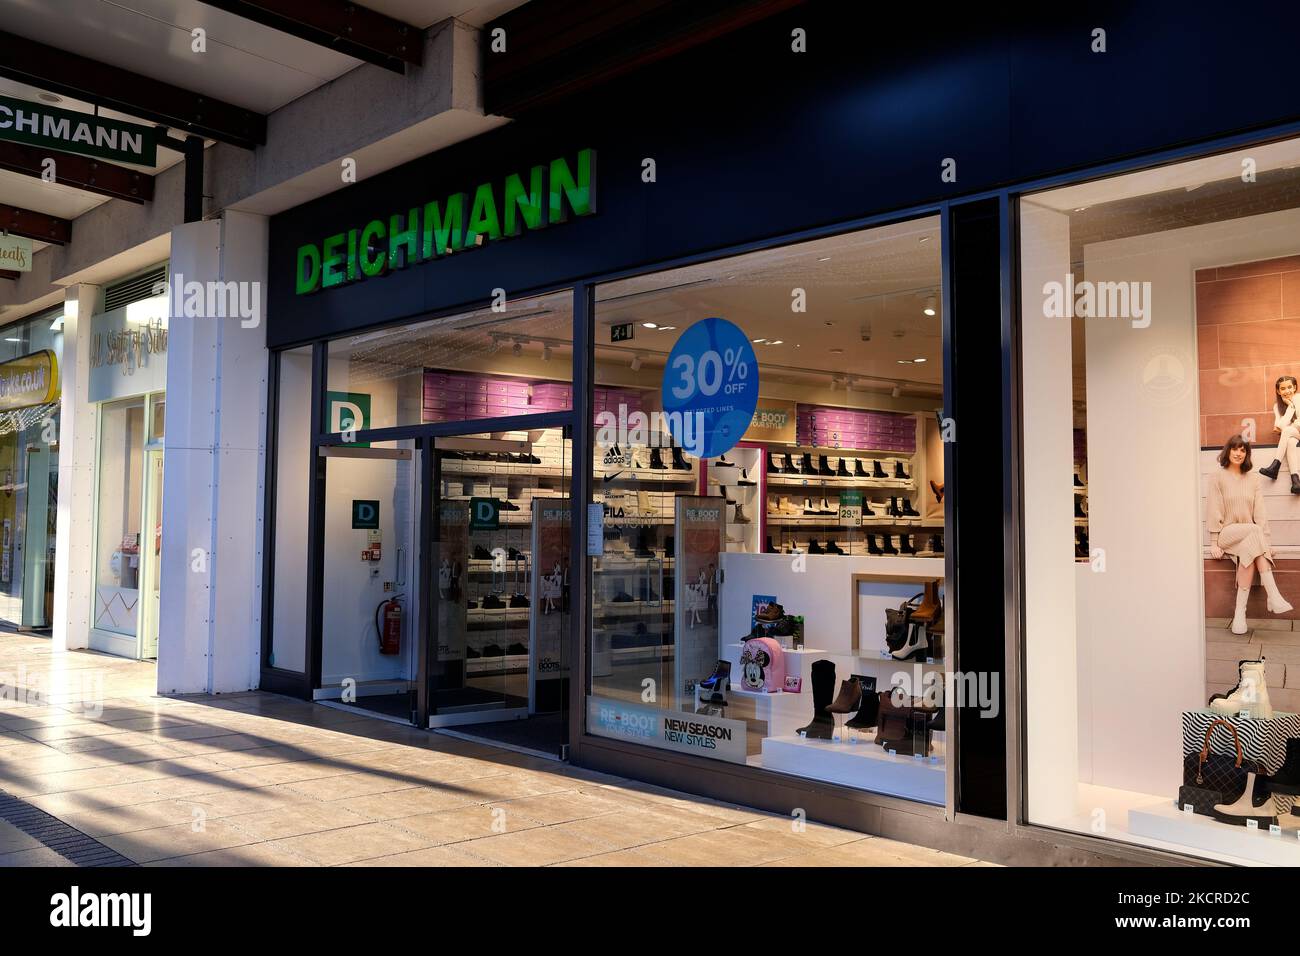 Deichmann shoes uk photography and images - Alamy